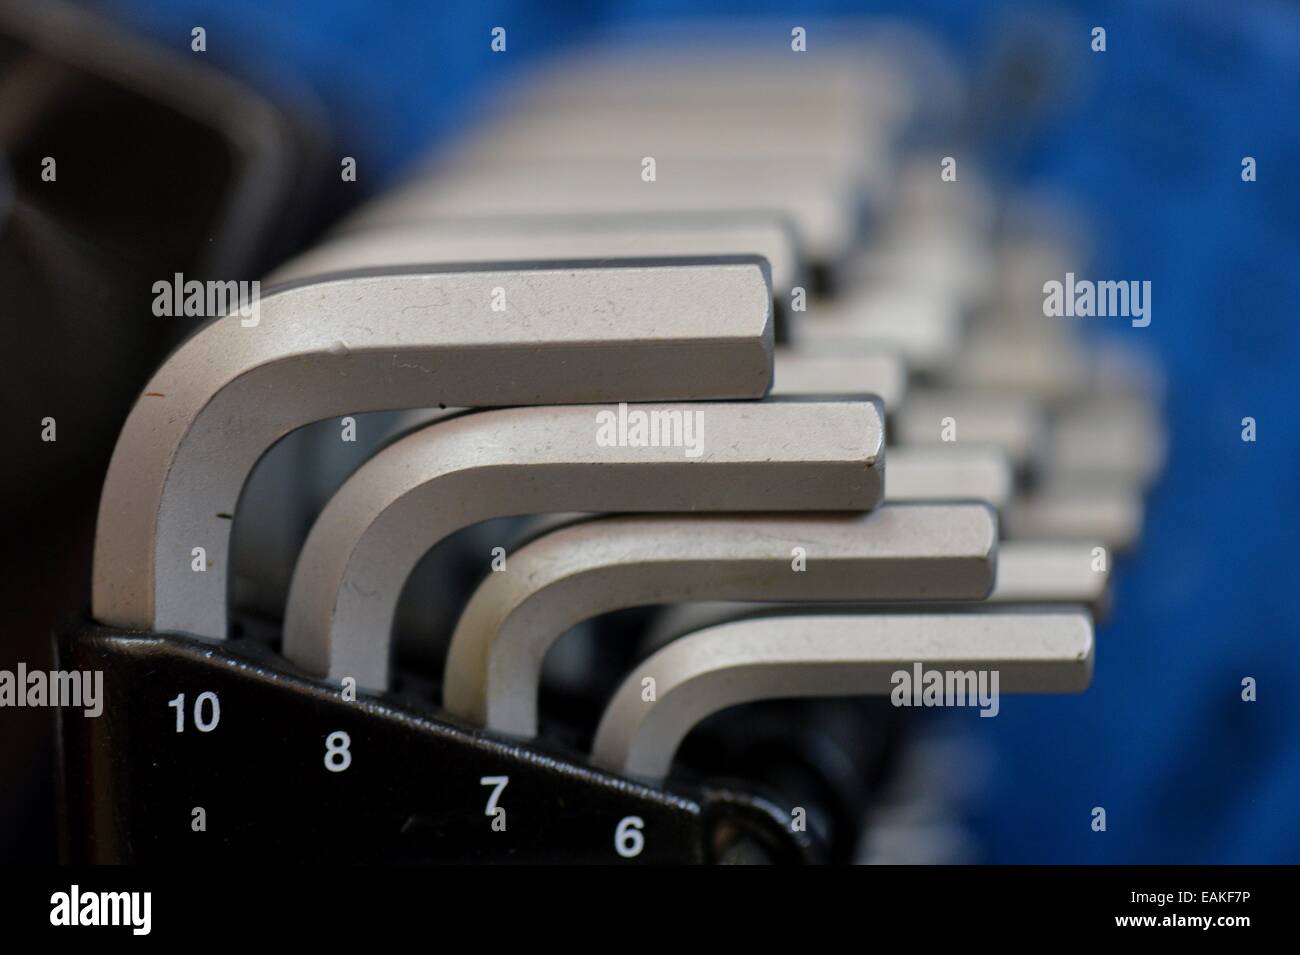 Set of hex keys in a store in Germany, City of Osterode, 13. November 2014. Photo: Frank May Stock Photo